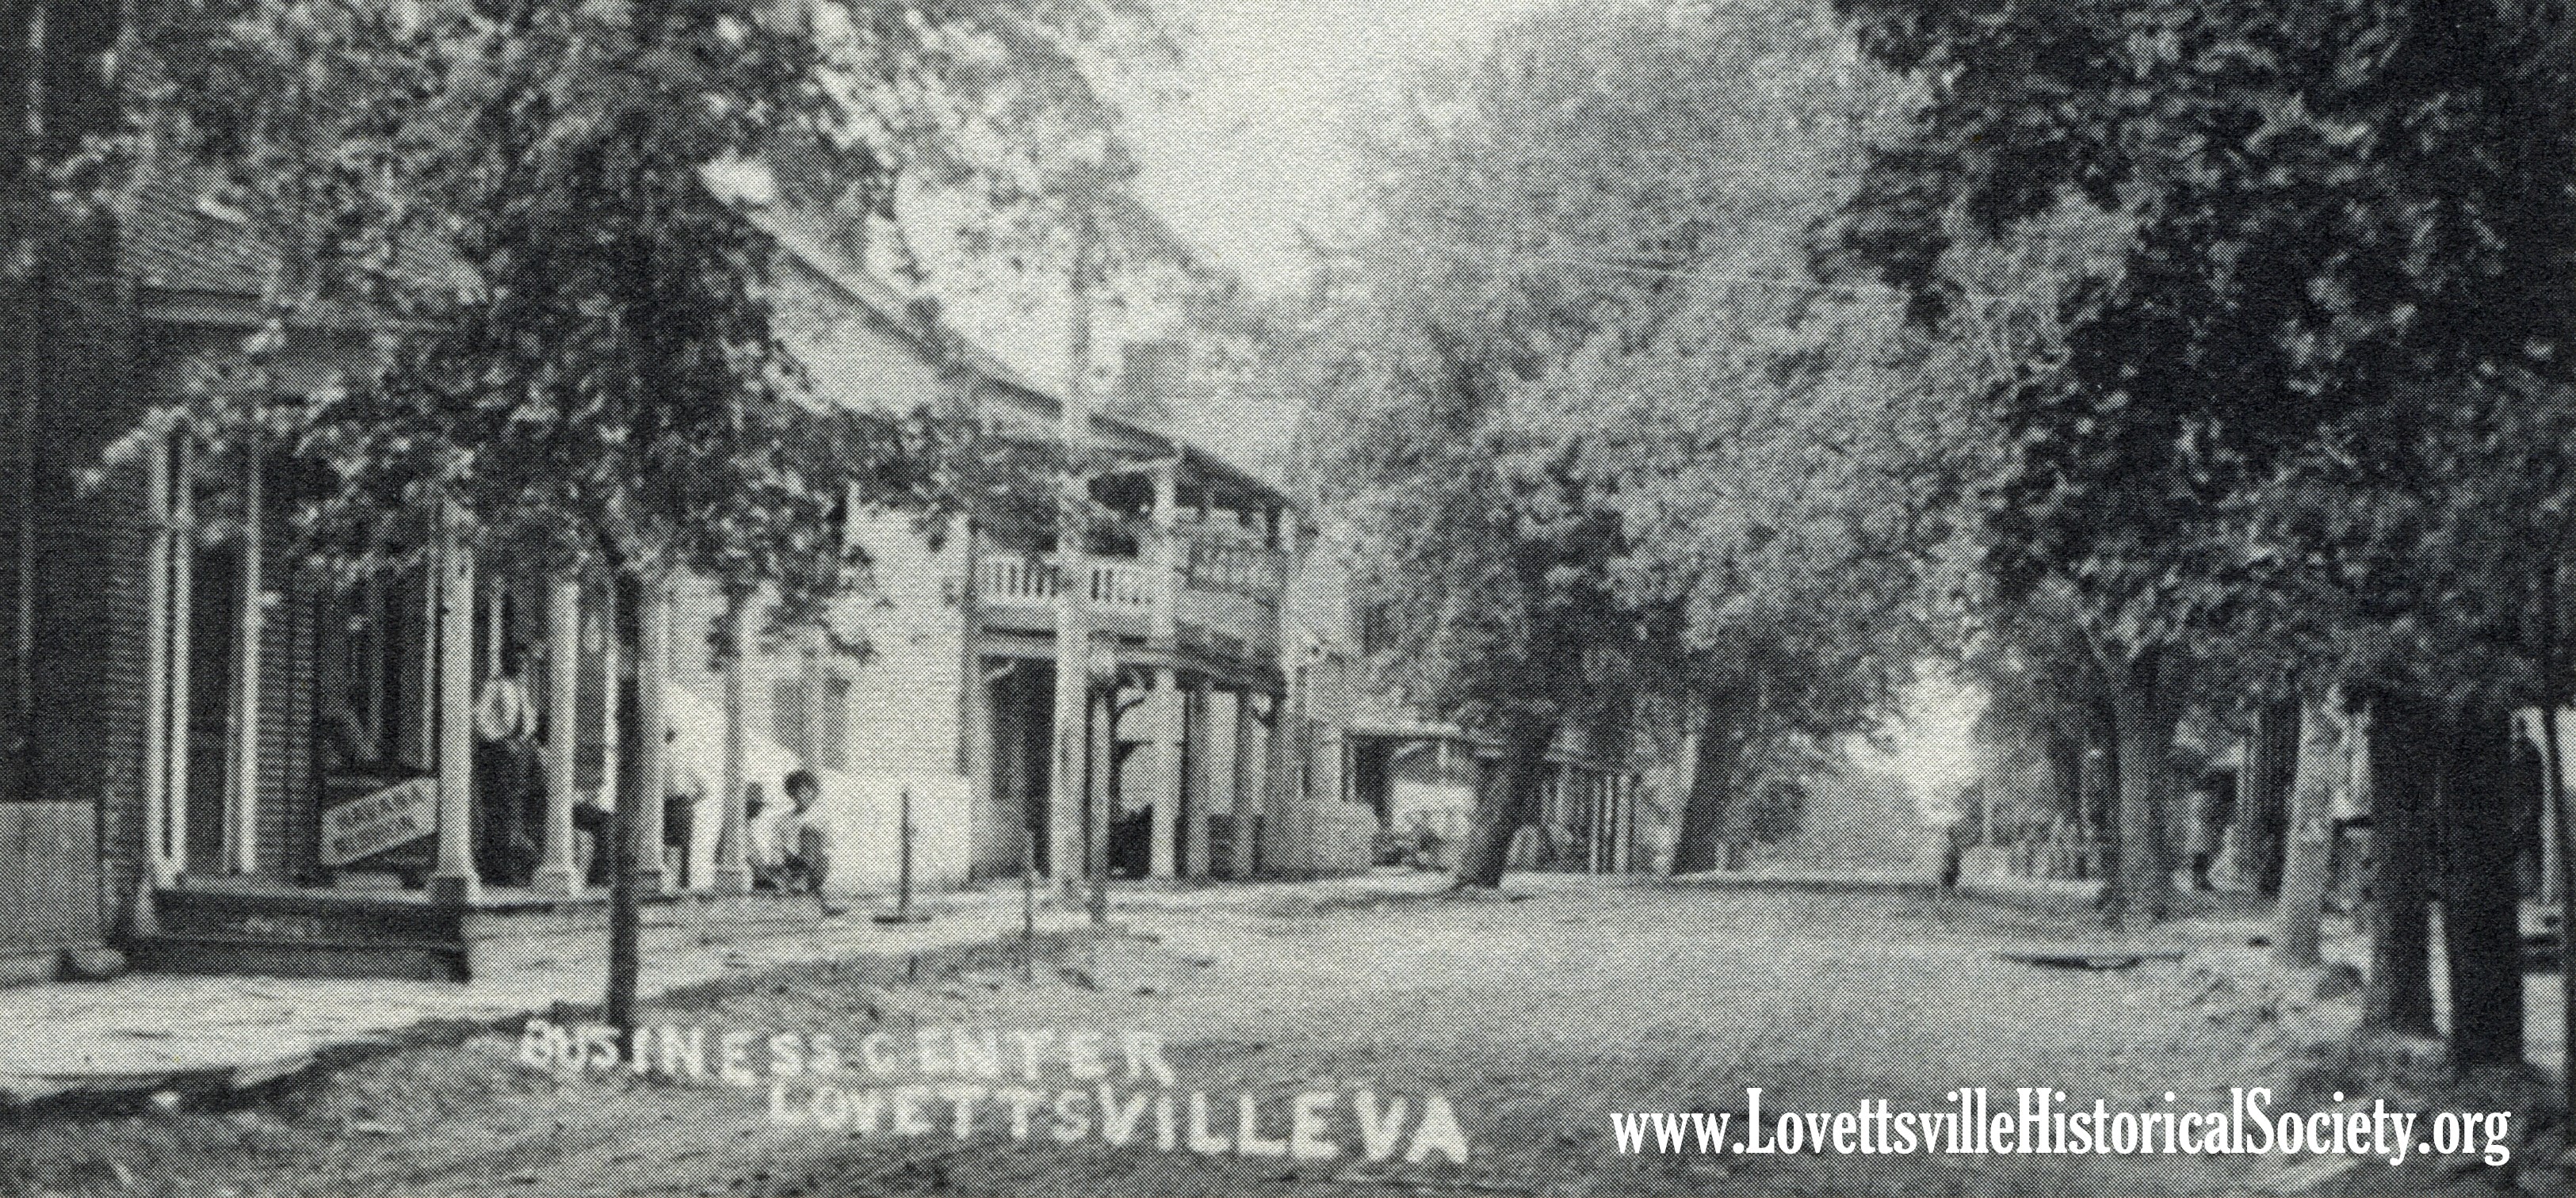 The building at center with the balcony was the old Lovettsville hotel and tavern which was probably built shortly after the town was laid out in 1820.  Among others, the building was acquired by Daniel Everhart in 1832, by John Snoots in 1847,  and by Jacob Snoots in 1856, according to Loudoun County land records.